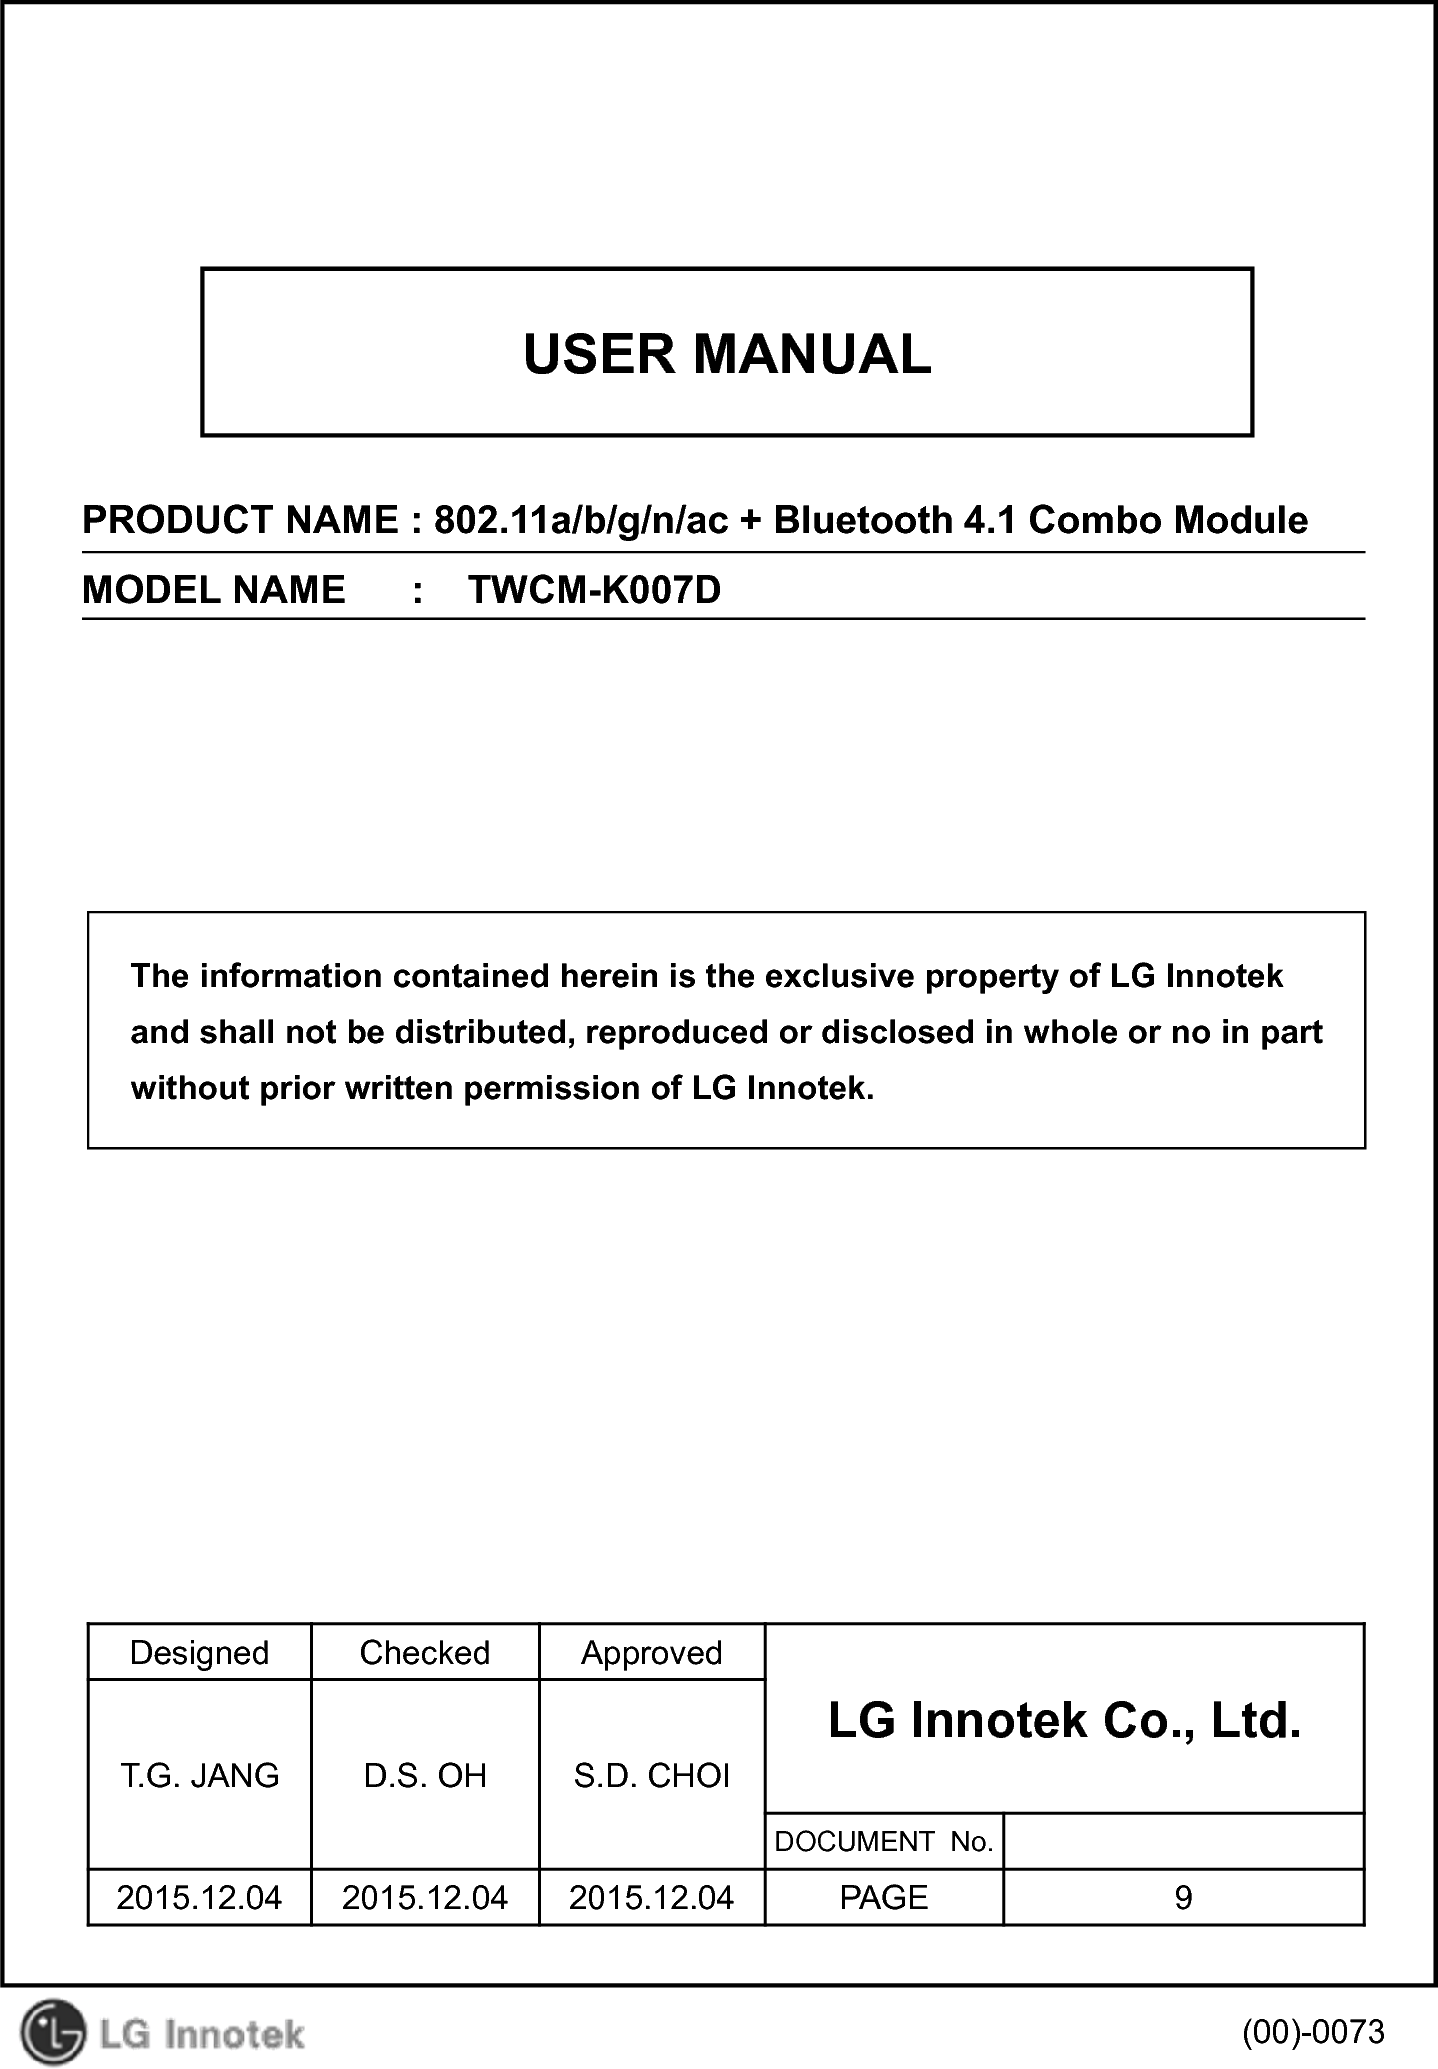 USER MANUALPRODUCT NAME : 802.11a/b/g/n/ac + Bluetooth 4.1 Combo Module MODEL NAME      :    TWCM-K007DDesigned Checked ApprovedLG Innotek Co., Ltd.   T.G. JANG D.S. OH S.D. CHOIDOCUMENT  No.2015.12.04 2015.12.04 2015.12.04 PAGE 9(00)-0073The information contained herein is the exclusive property of LG Innotekand shall not be distributed, reproduced or disclosed in whole or no in partwithout prior written permission of LG Innotek.